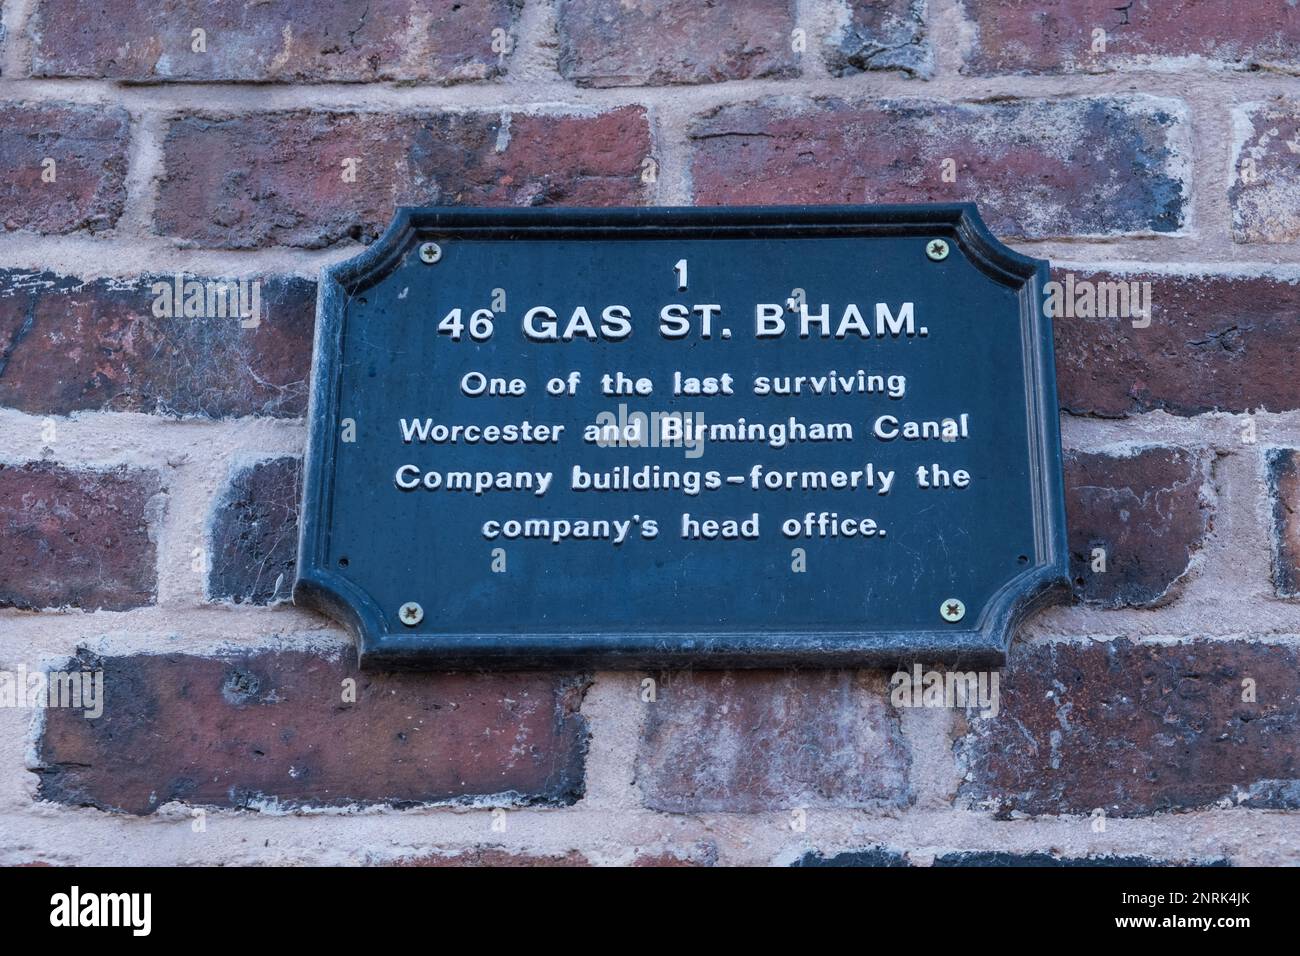 Plaque marking 46 Gas Street,one of the last surviving Worcester and Birmingham Canal Company buildings and former head office Stock Photo